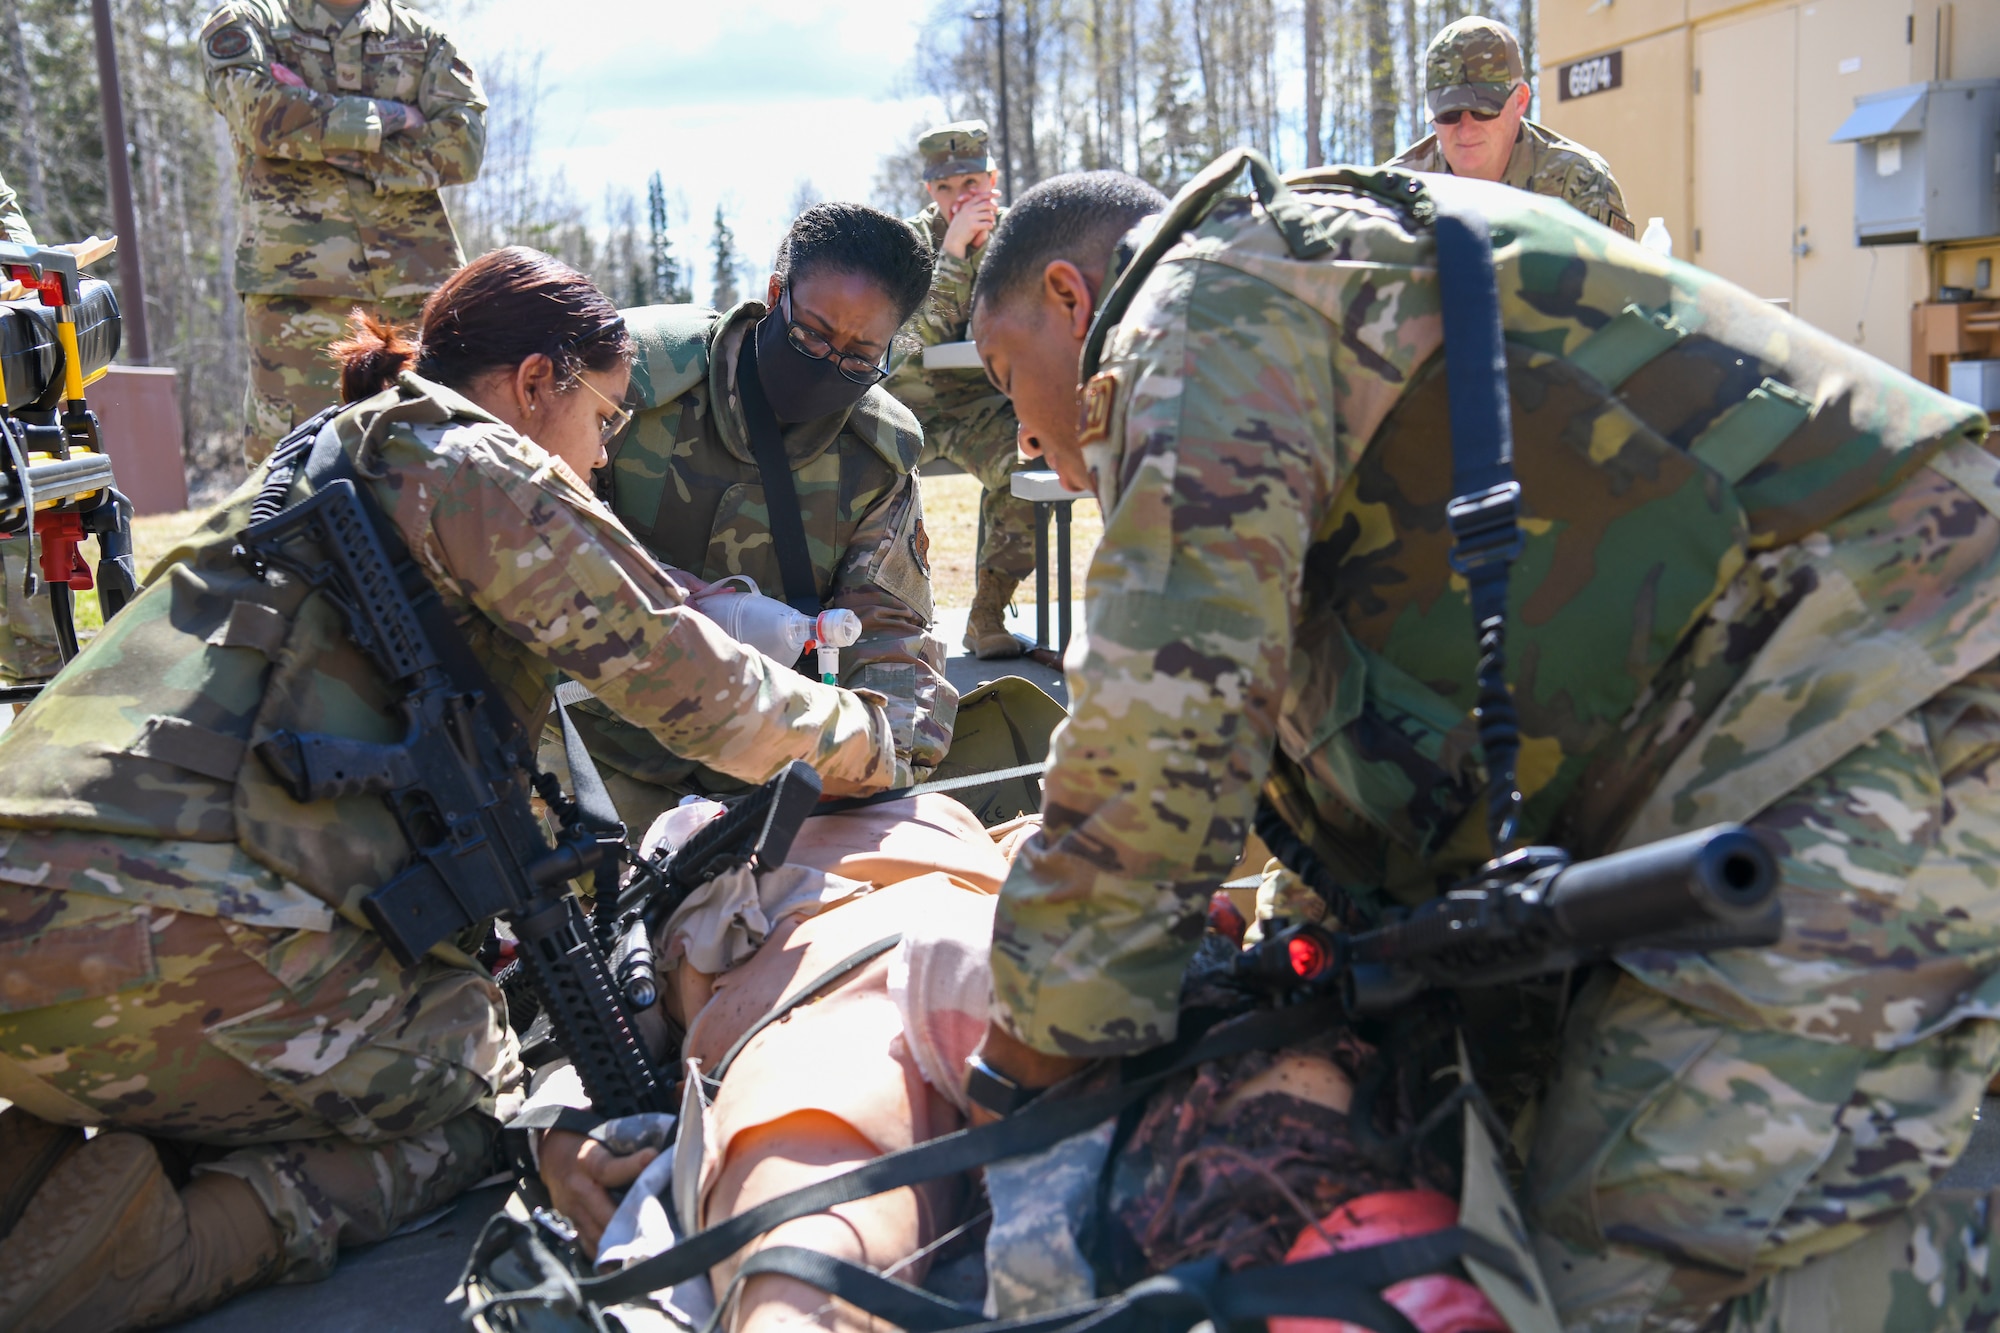 N.Y. Air National Guard airmen from the 106th Rescue Wing, Westhampton Beach, N.Y., treat a “patient,” an advanced medical simulation dummy, at Joint Base Elmendorf-Richardson in Anchorage, Alaska, May 5, 2022. The combat medics of the 106th Medical Group participated in their first Military Facility Annual Training since the start of the COVID-19 pandemic, and were expected to encounter a patient, assess the injuries, mitigate the risk, stop bleeding, treat secondary wounds, and/or resuscitate the patient and maintain the airway. (Air National Guard photo by SSgt Daniel H. Farrell)